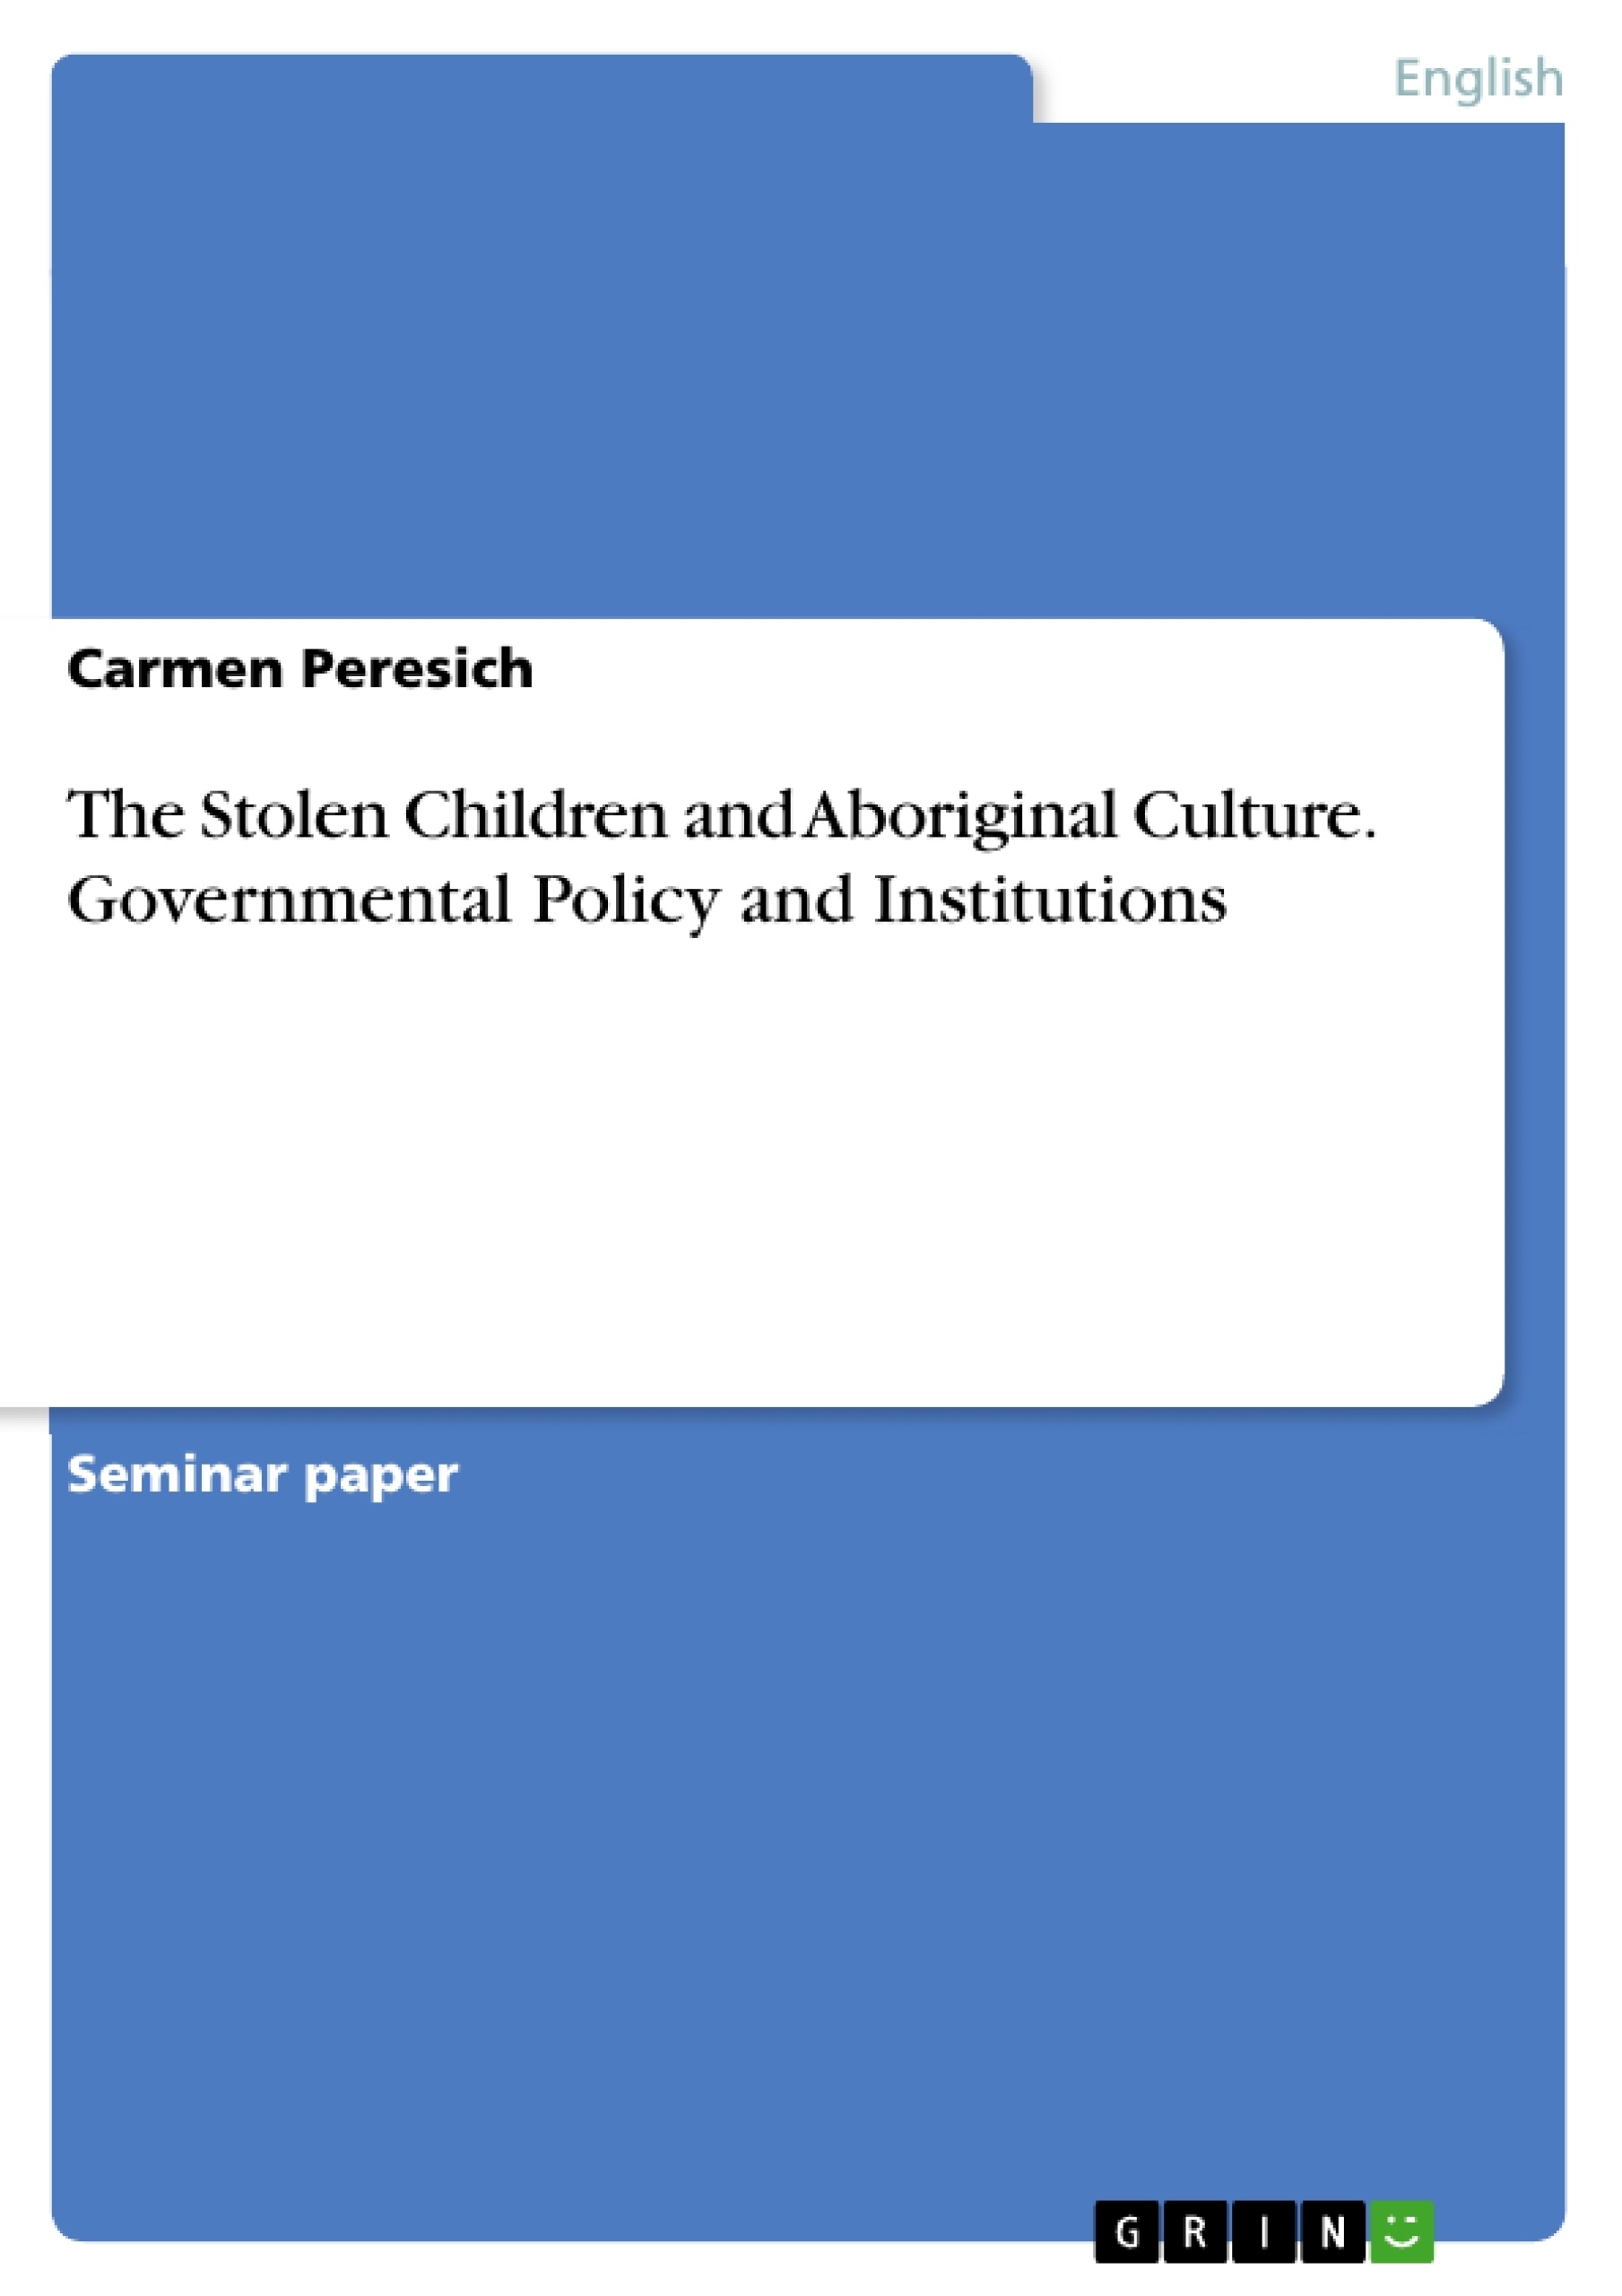 Title: The Stolen Children and Aboriginal Culture. Governmental Policy and Institutions